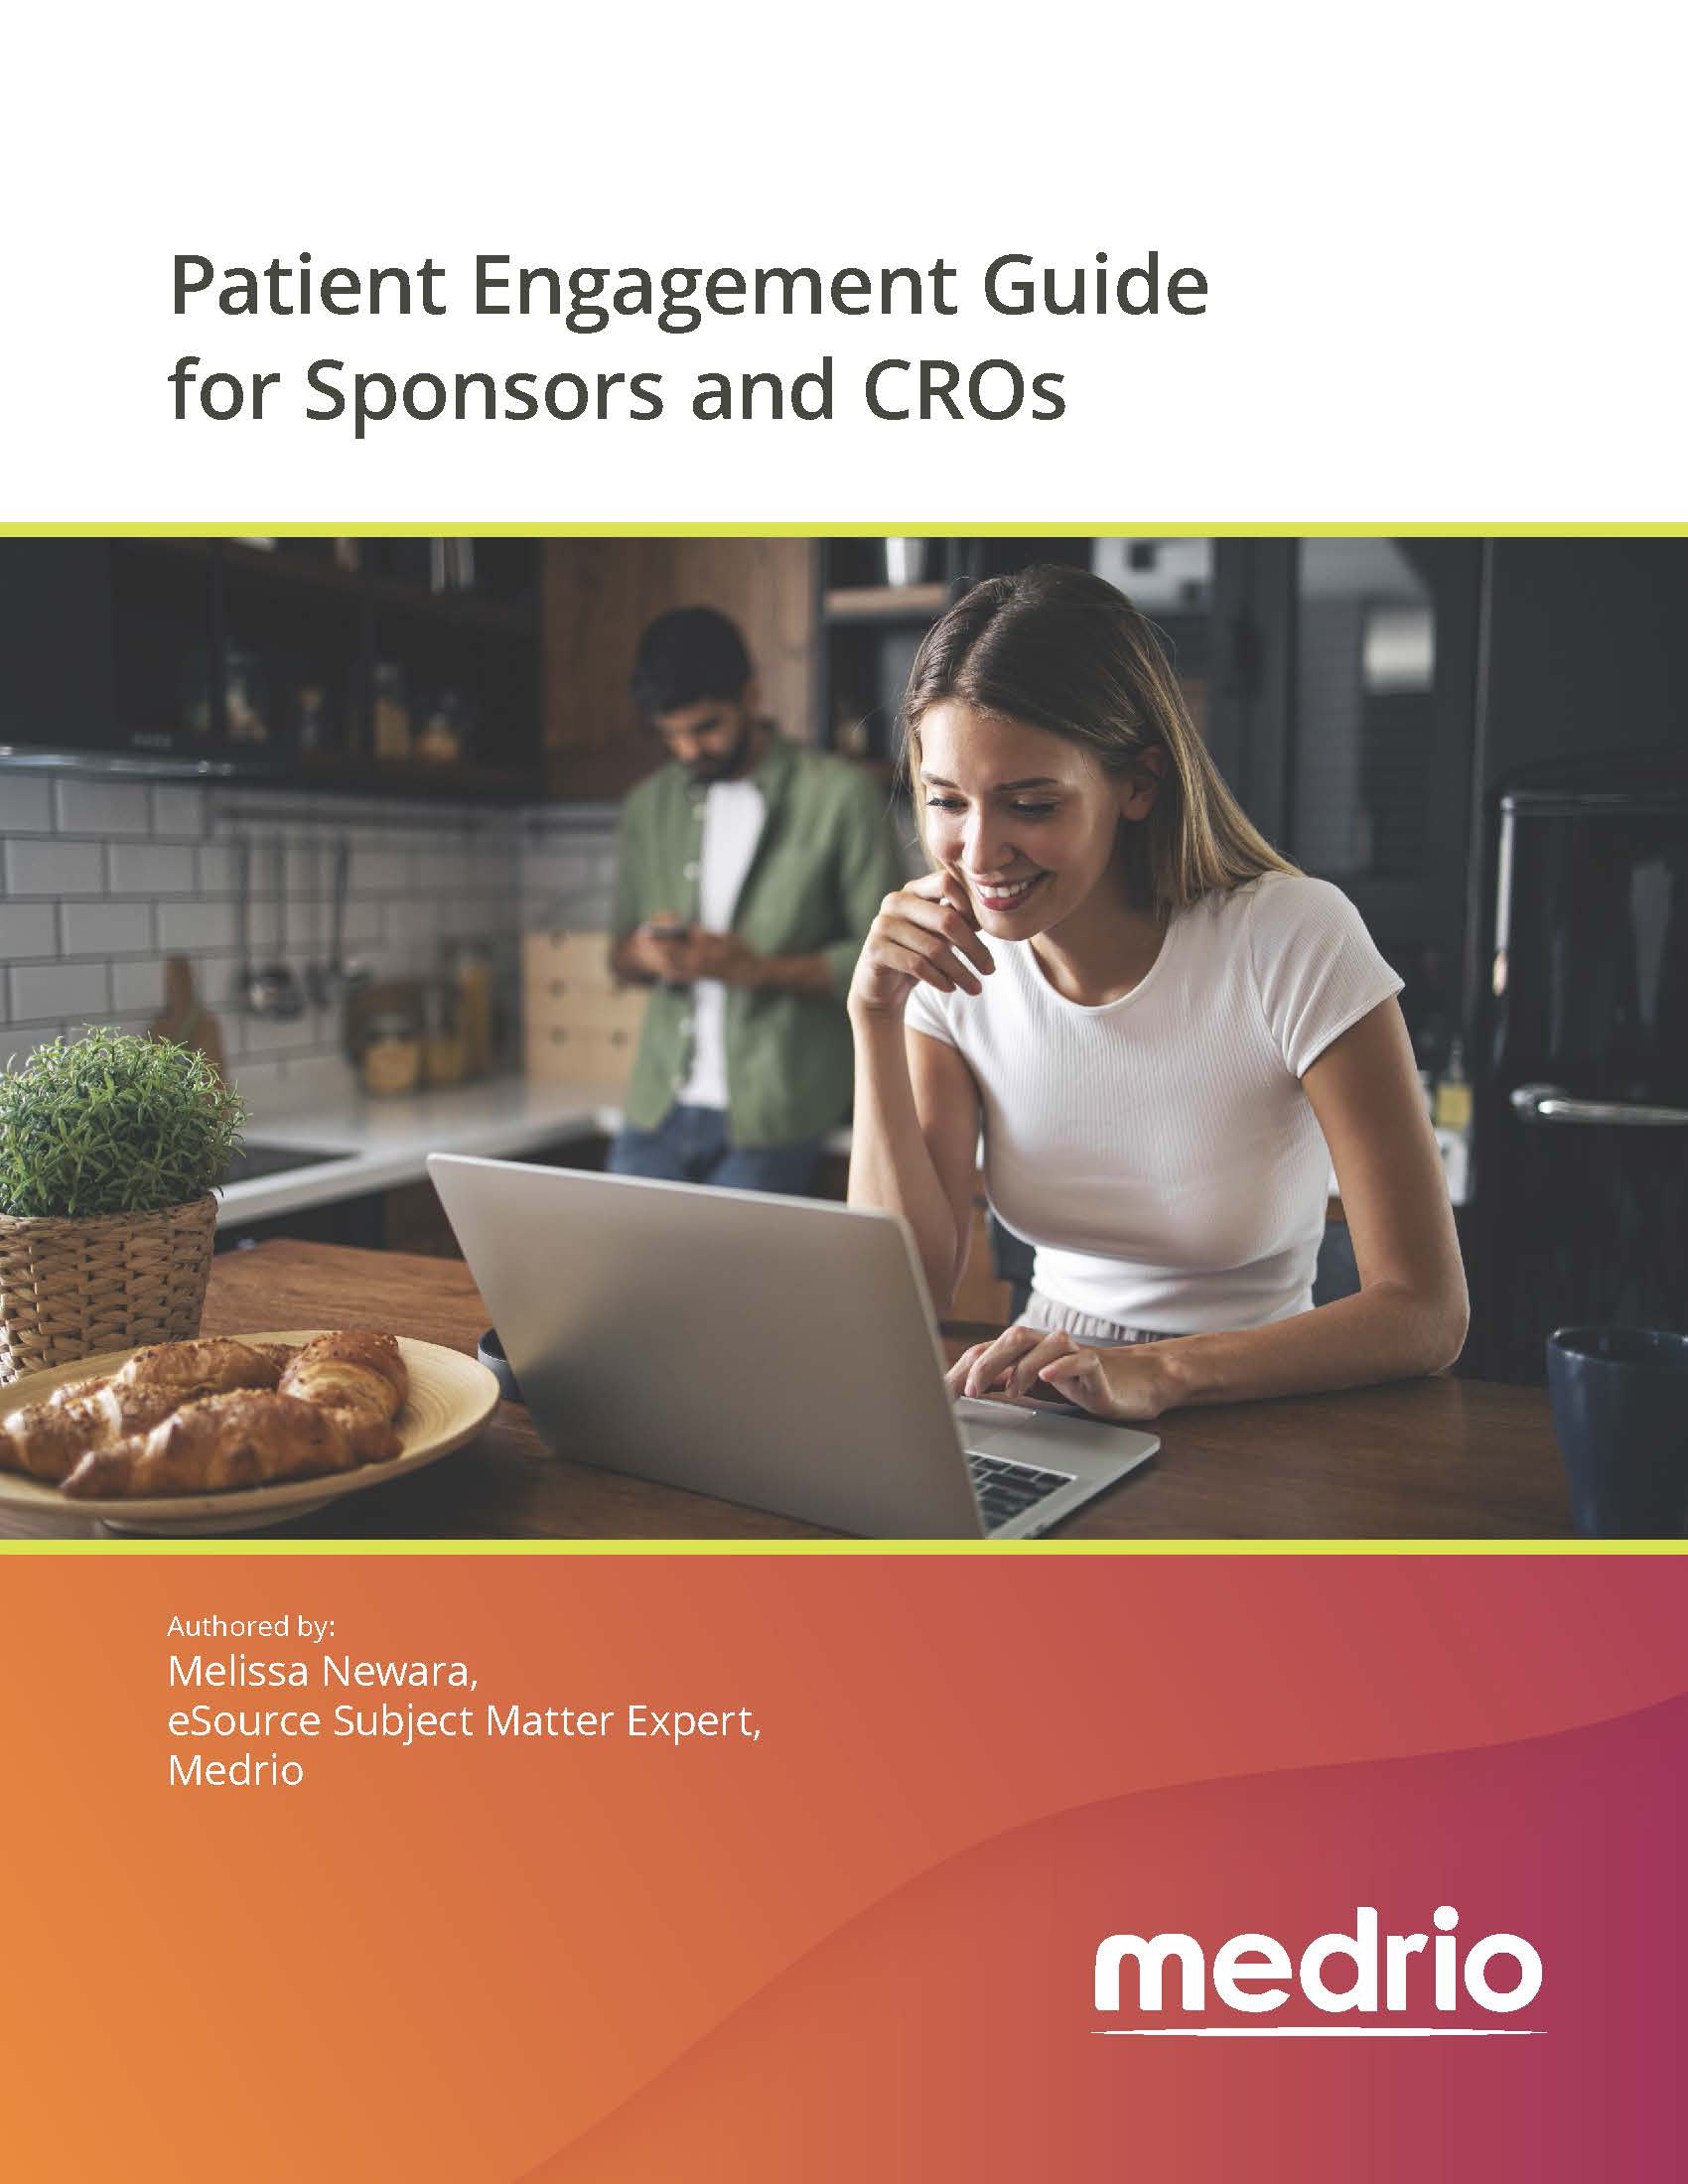 Patient Engagement Guide for Sponsors and CROs